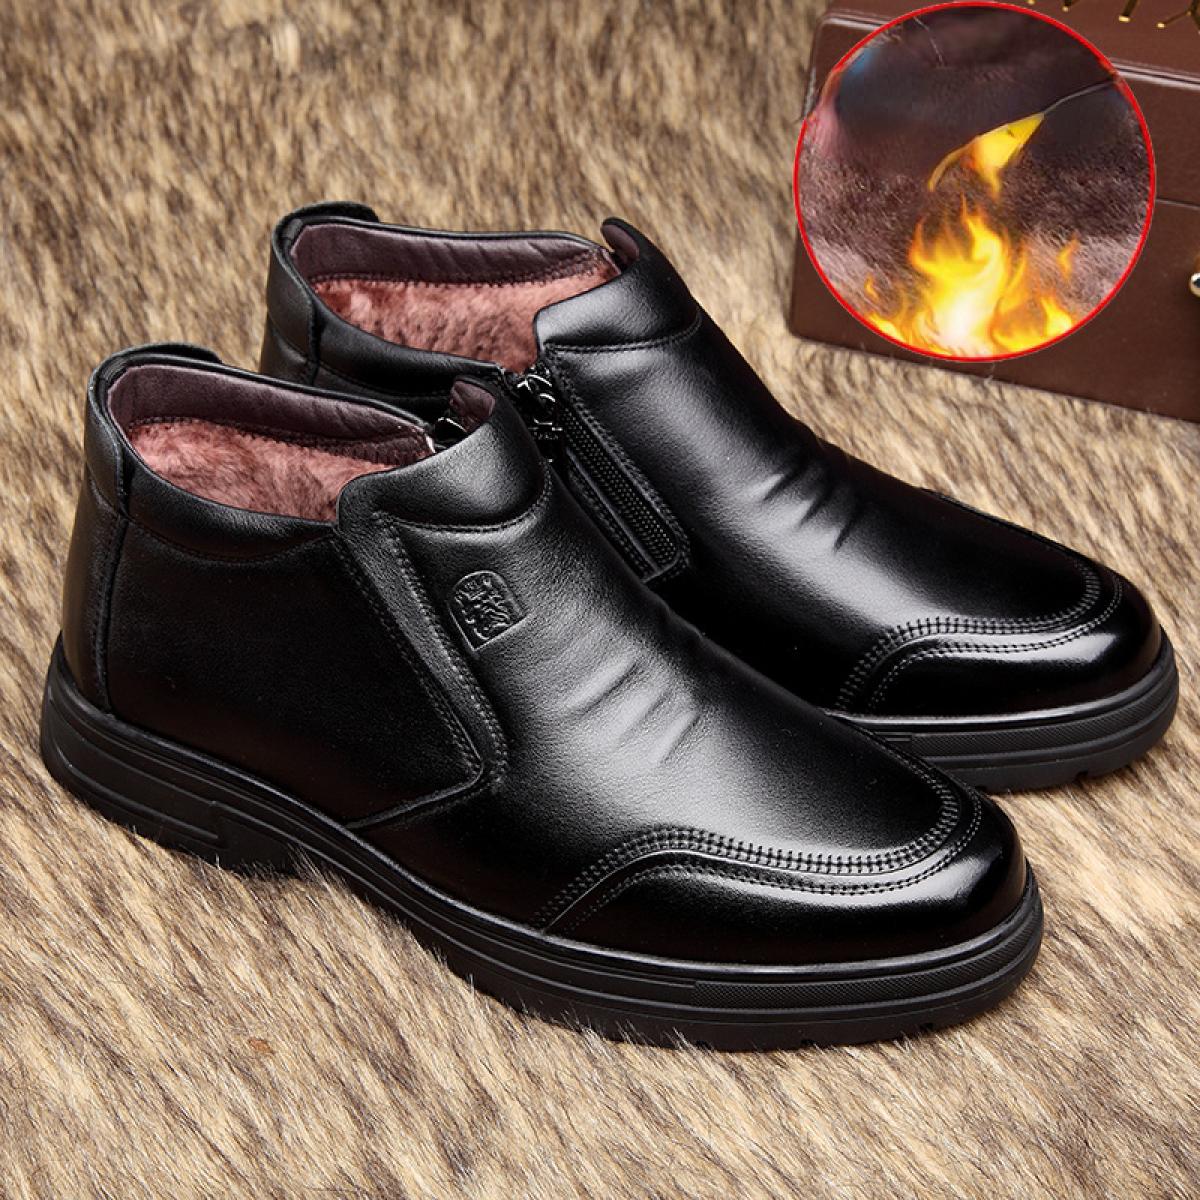 Winter Men's Thickened Leather Boots Business High Top Cotton Shoes Round Head Non Slip Comfort Walking Flats Botas Homb